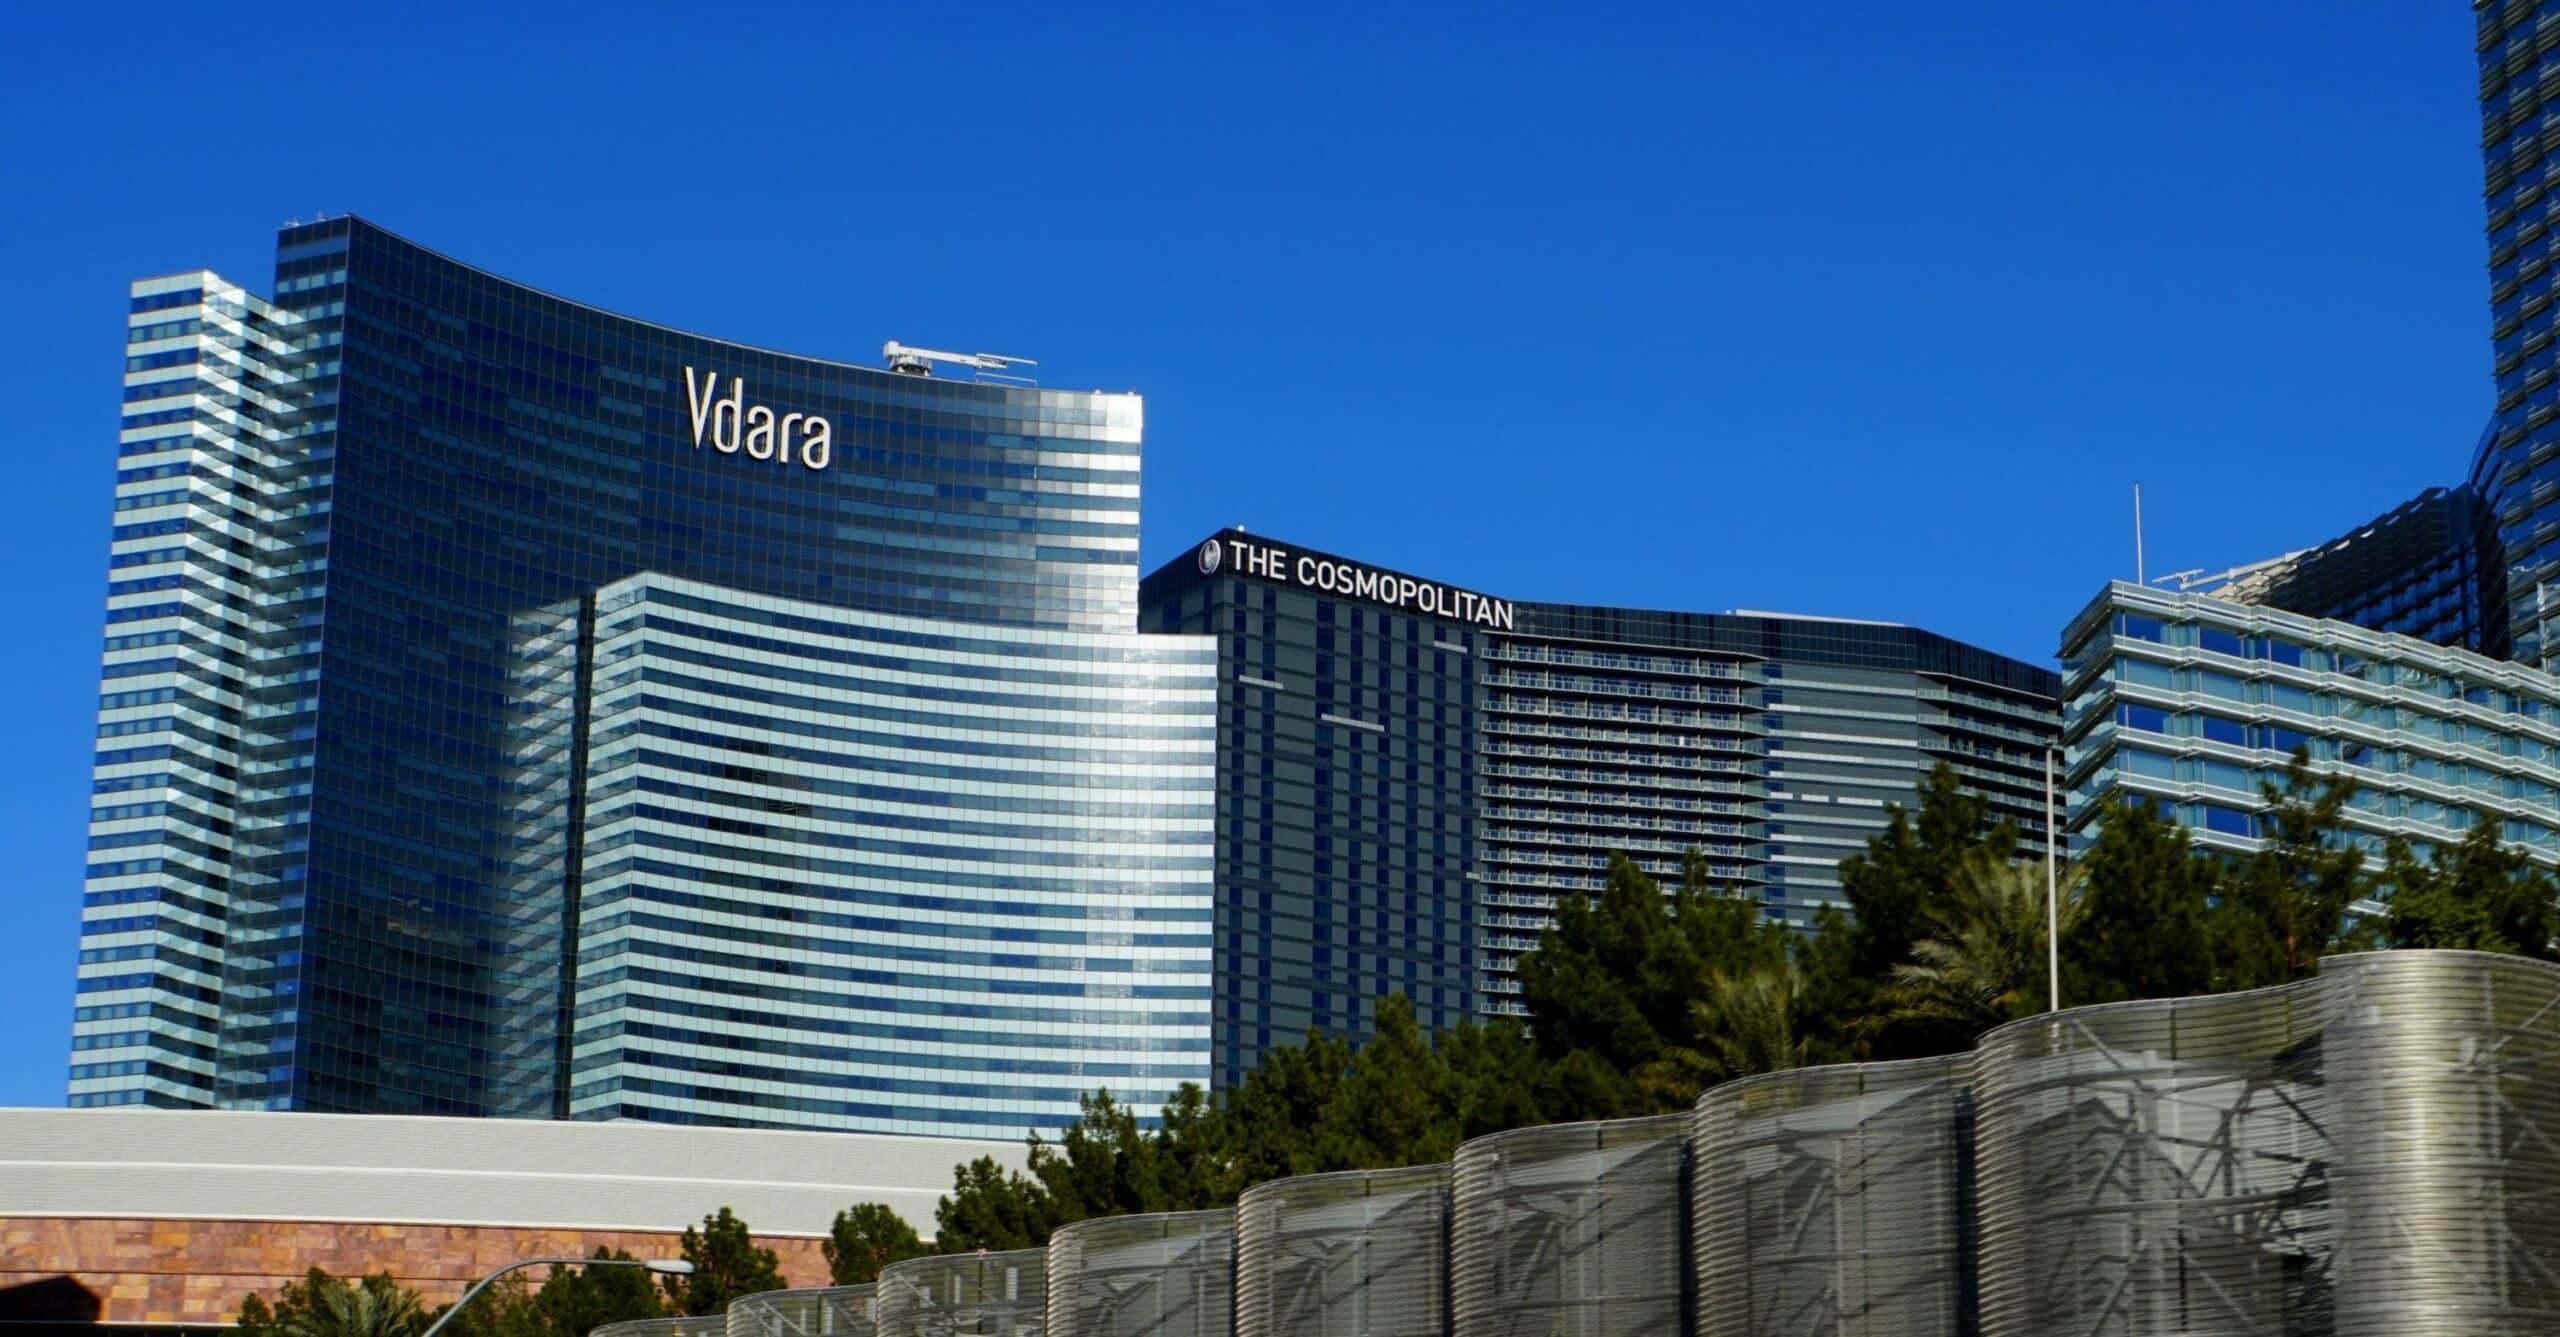 view of Vdara Las Vegas from outside on a sunny day